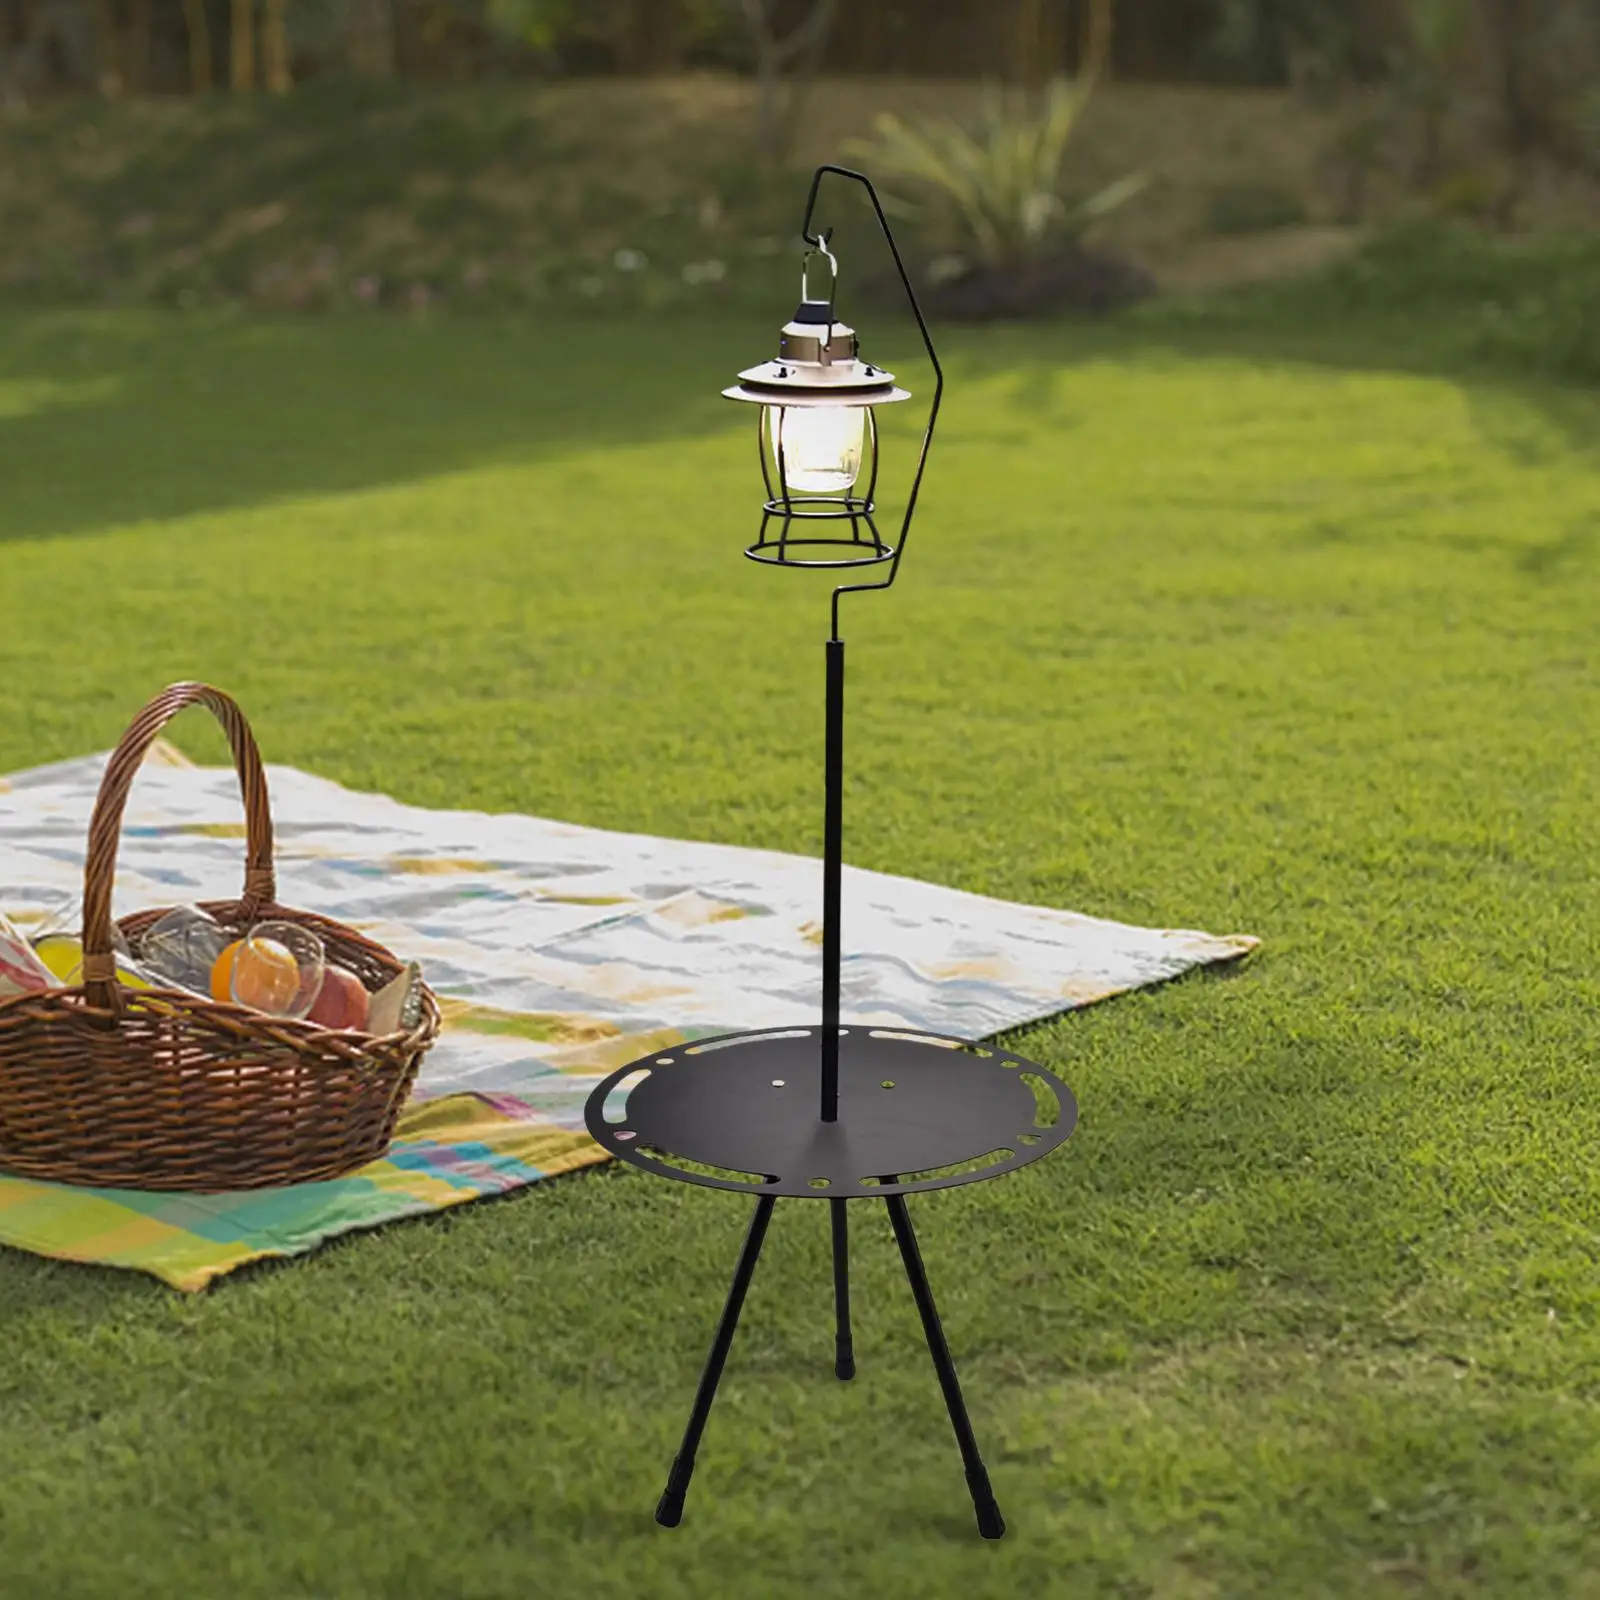 Camping Table Small Round Table with Lantern Holder Portable Table Outdoor Folding Table Tea Table for Patio Picnic Outdoor